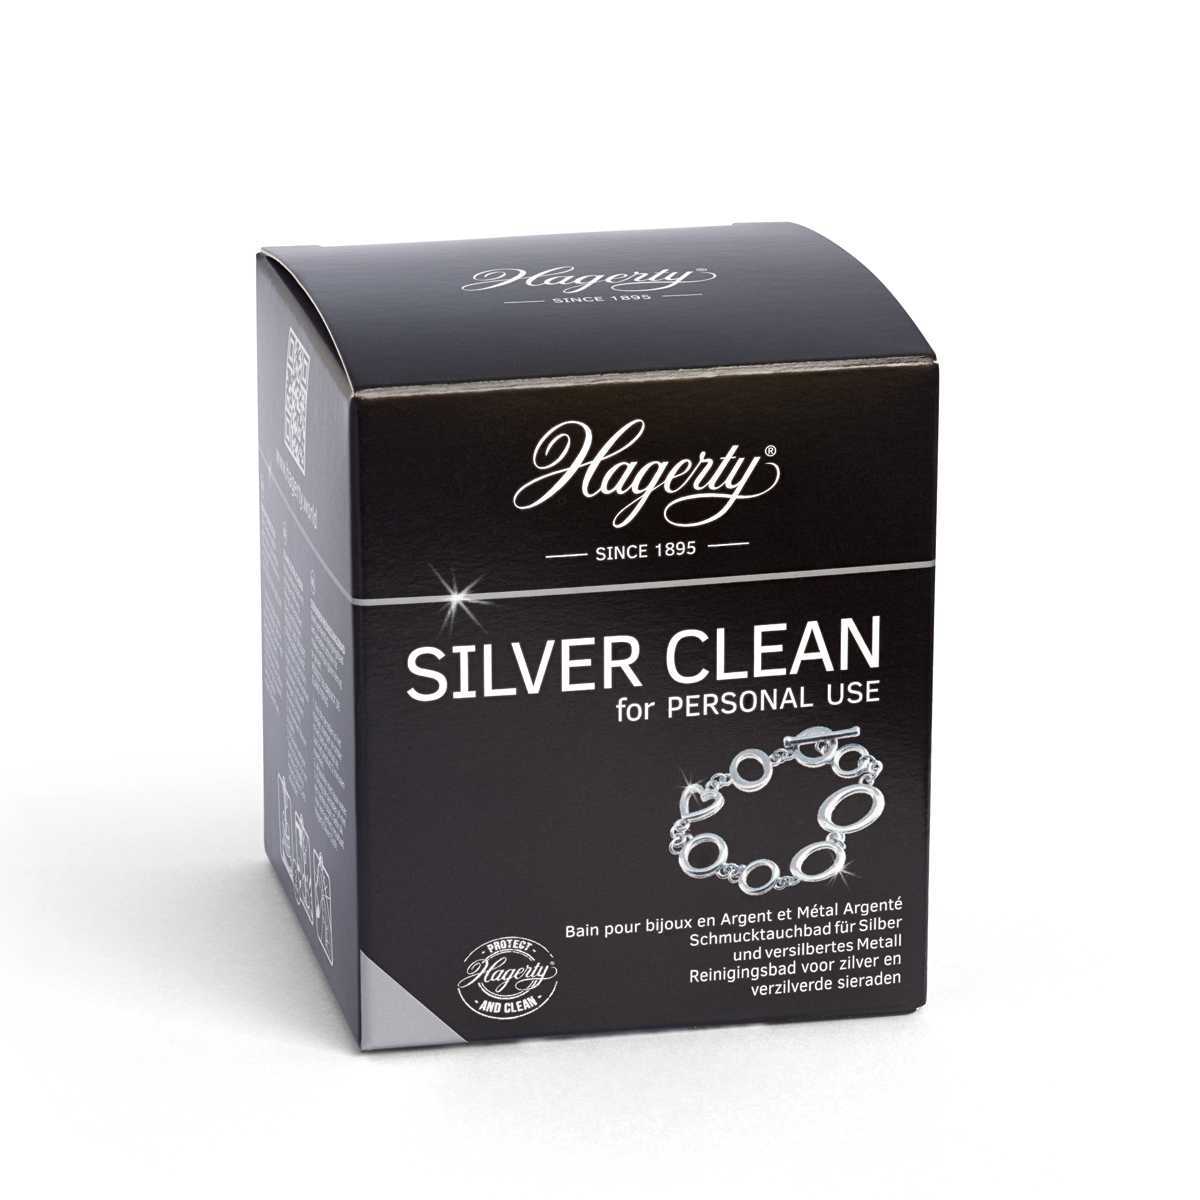 Jalan Jalan : HAGERTY Silver Jewelry Cleaner